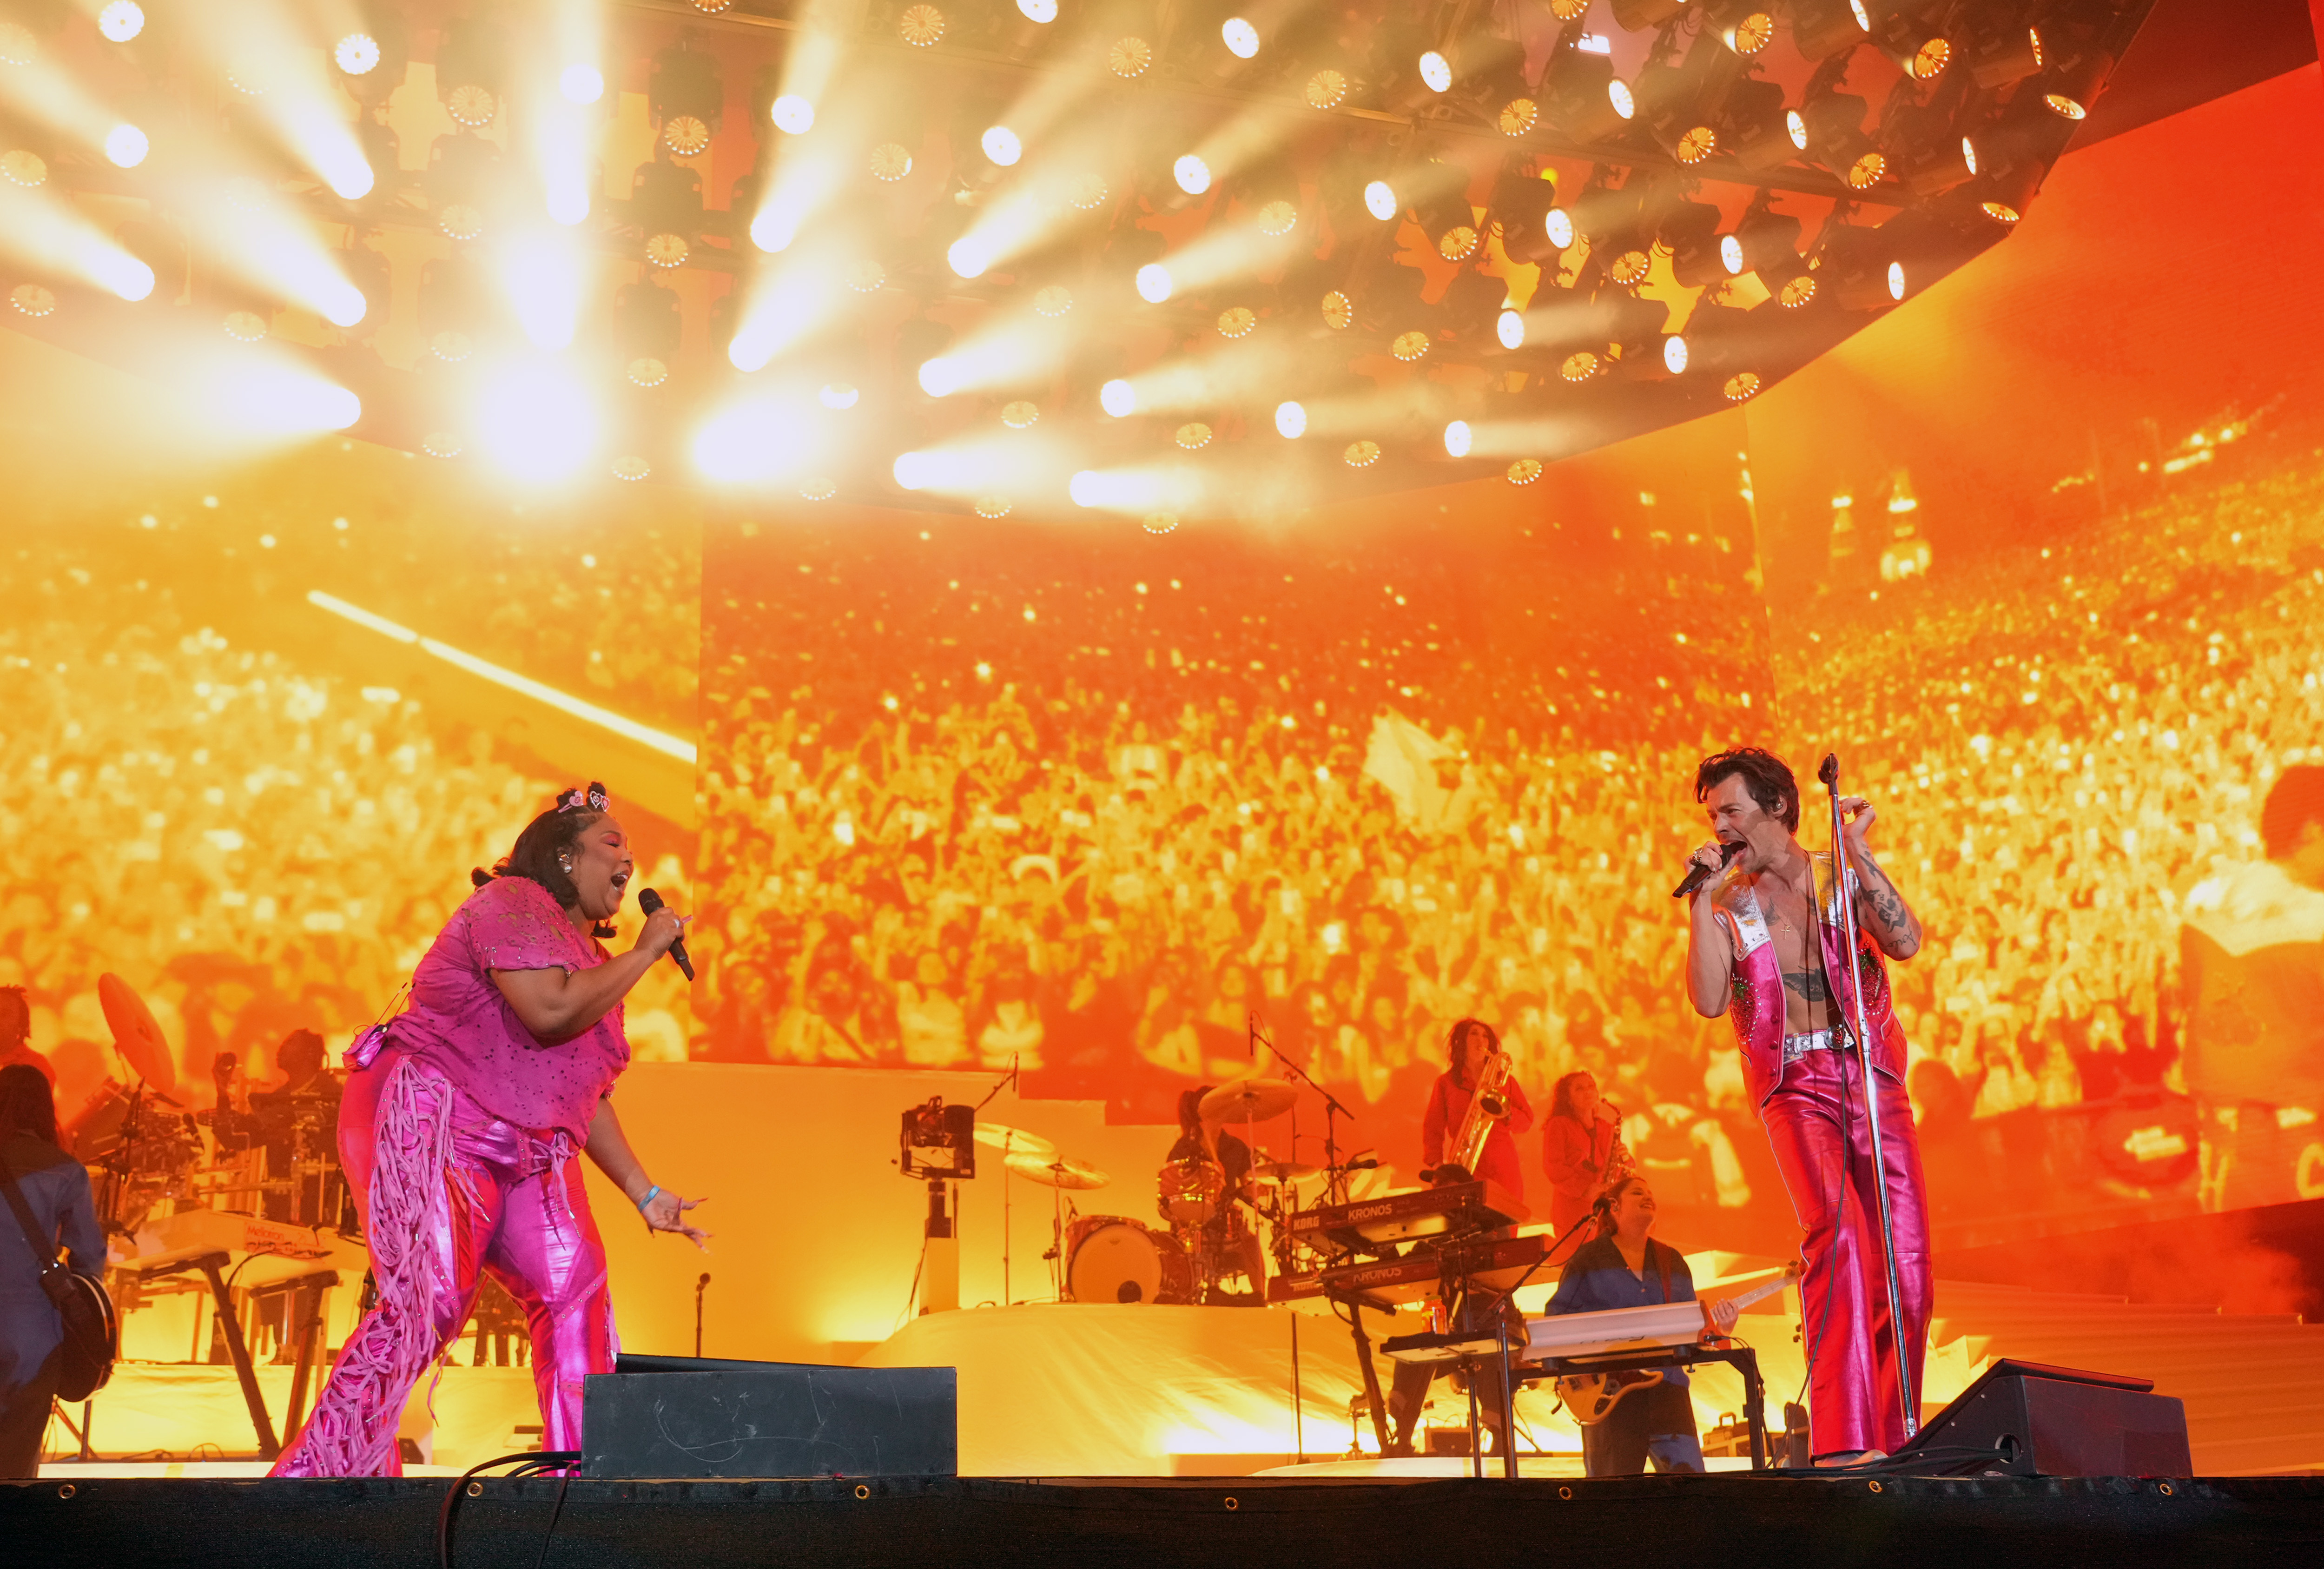 Lizzo and Harry Styles sang I will survive together on stage at Coachella 2022 Coachella, in Indio, California.  (Kevin Mazur/Getty Images for Harry Styles)